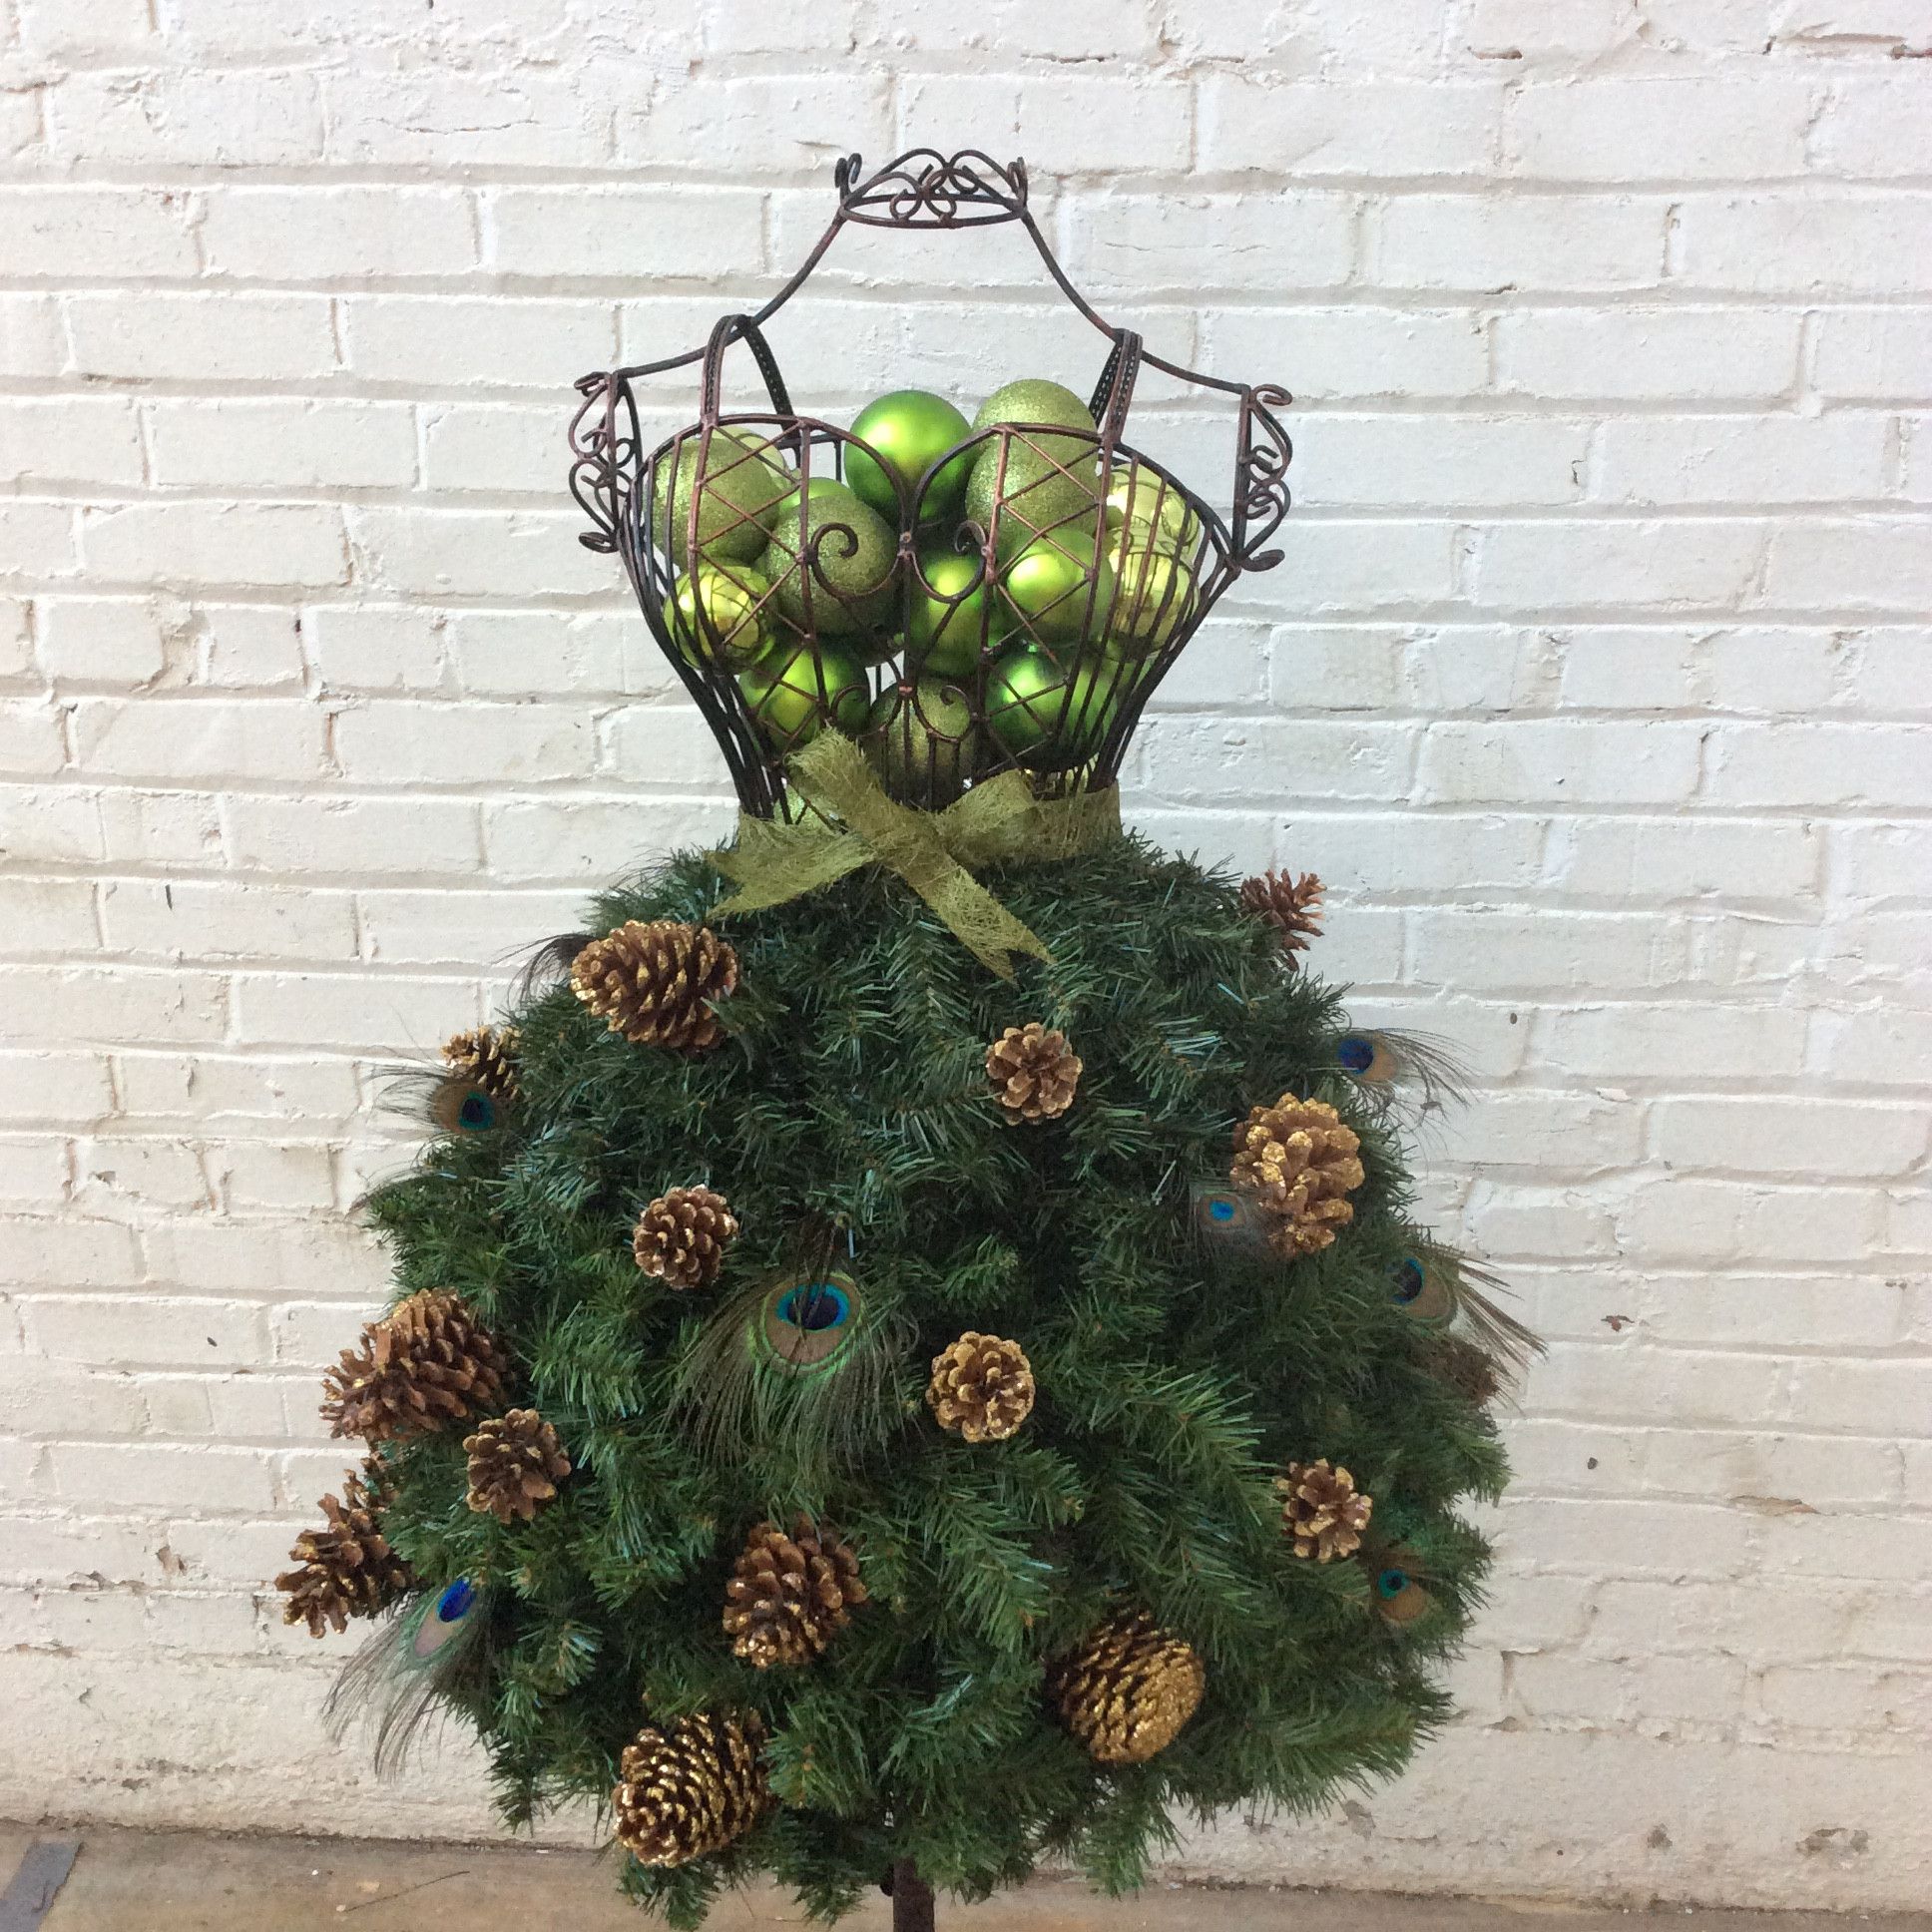 The 10 Best Dress Form Christmas Trees on a Wire Dress form 